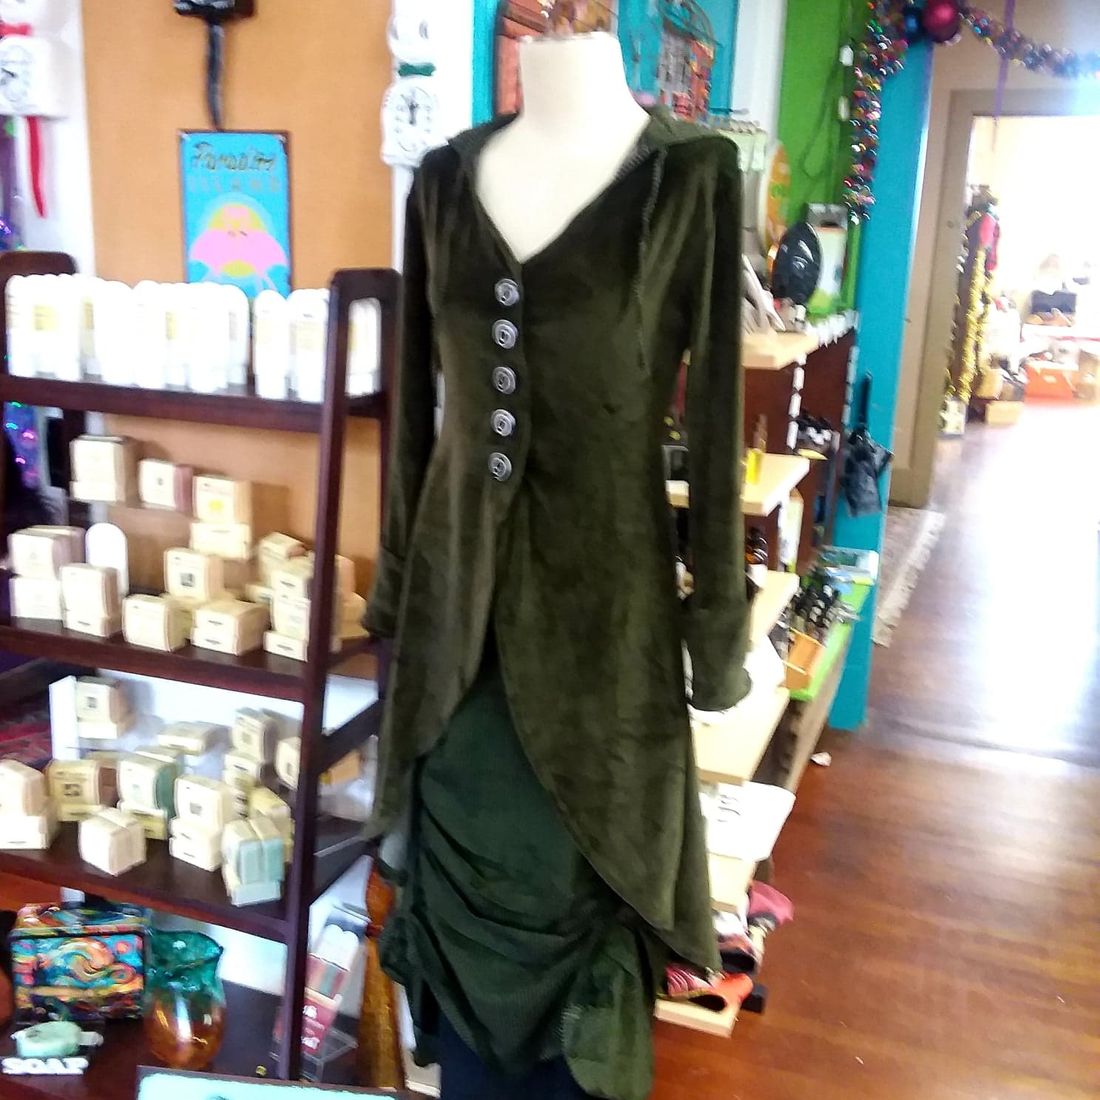 Clothing at the Hip Gypsy emporium